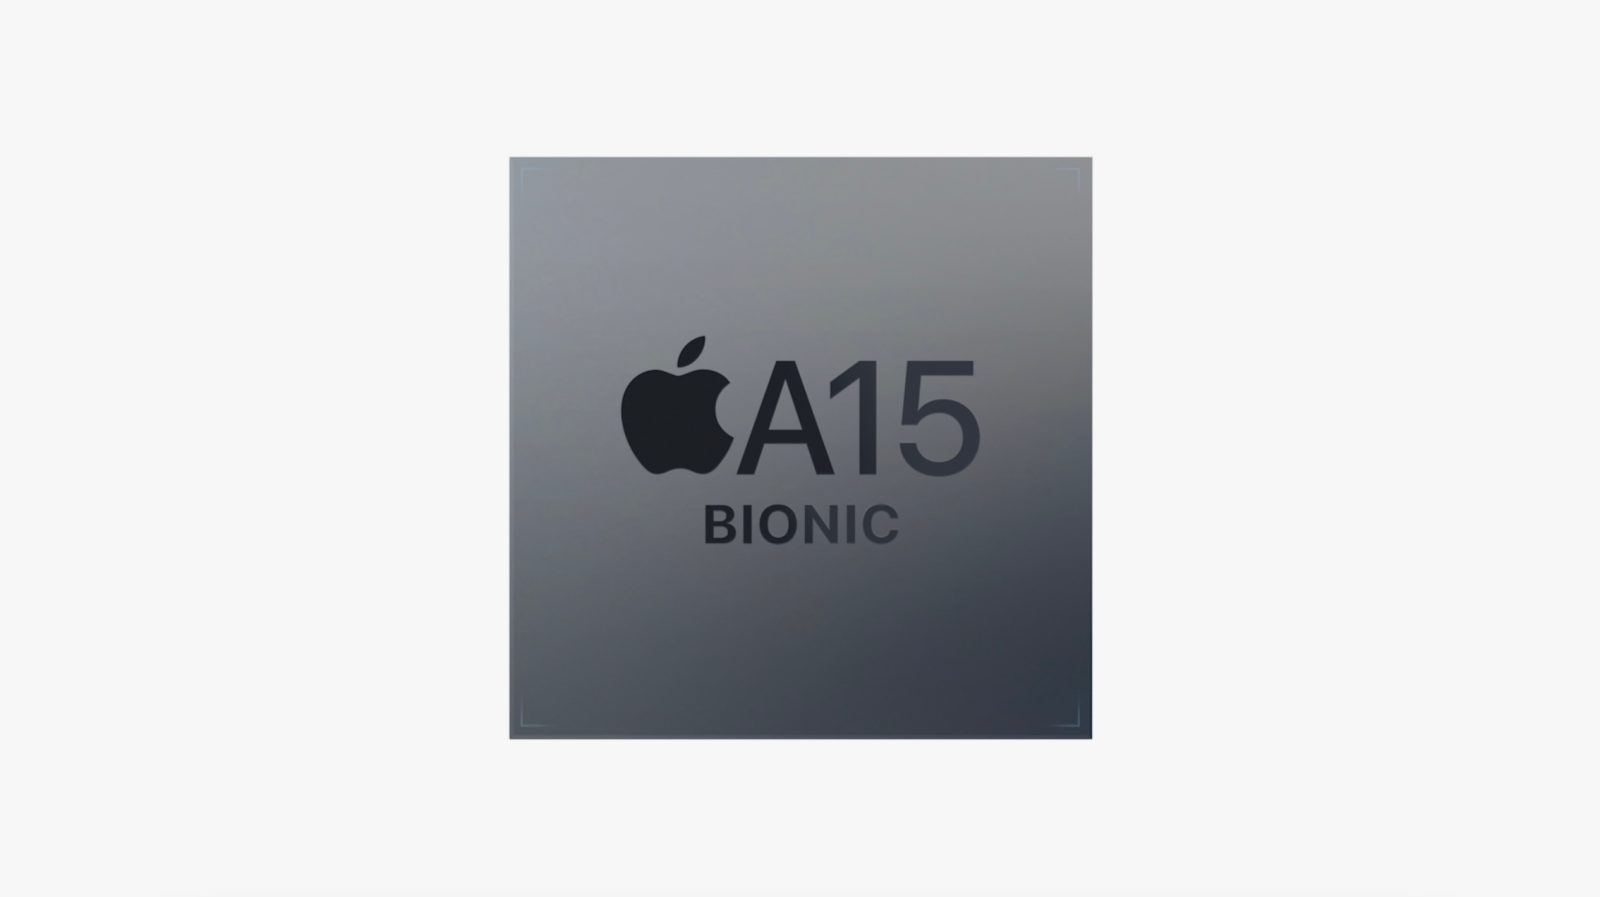 iPhone 13 Pro's A15 Bionic chip has more powerful GPU than iPhone 13 - 9to5Mac